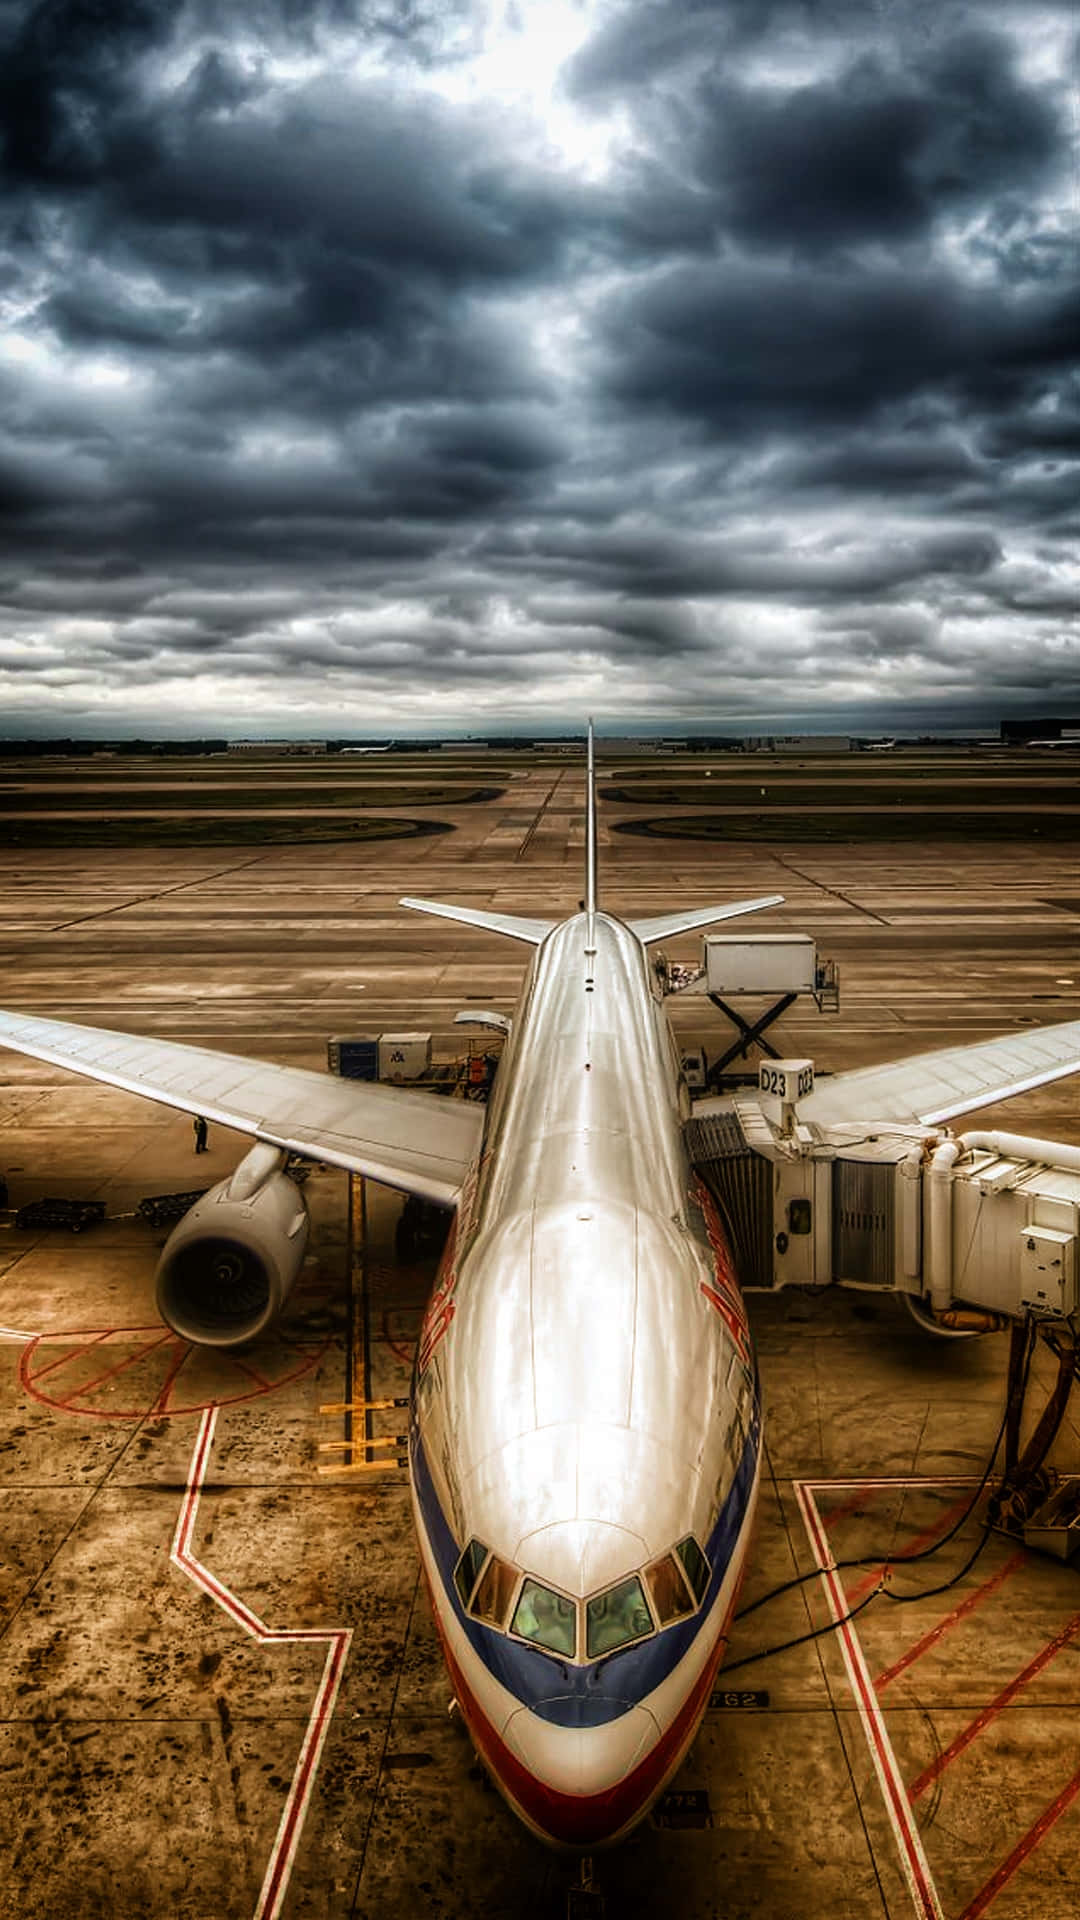 Commercial_ Aircraft_ Under_ Stormy_ Skies.jpg Wallpaper